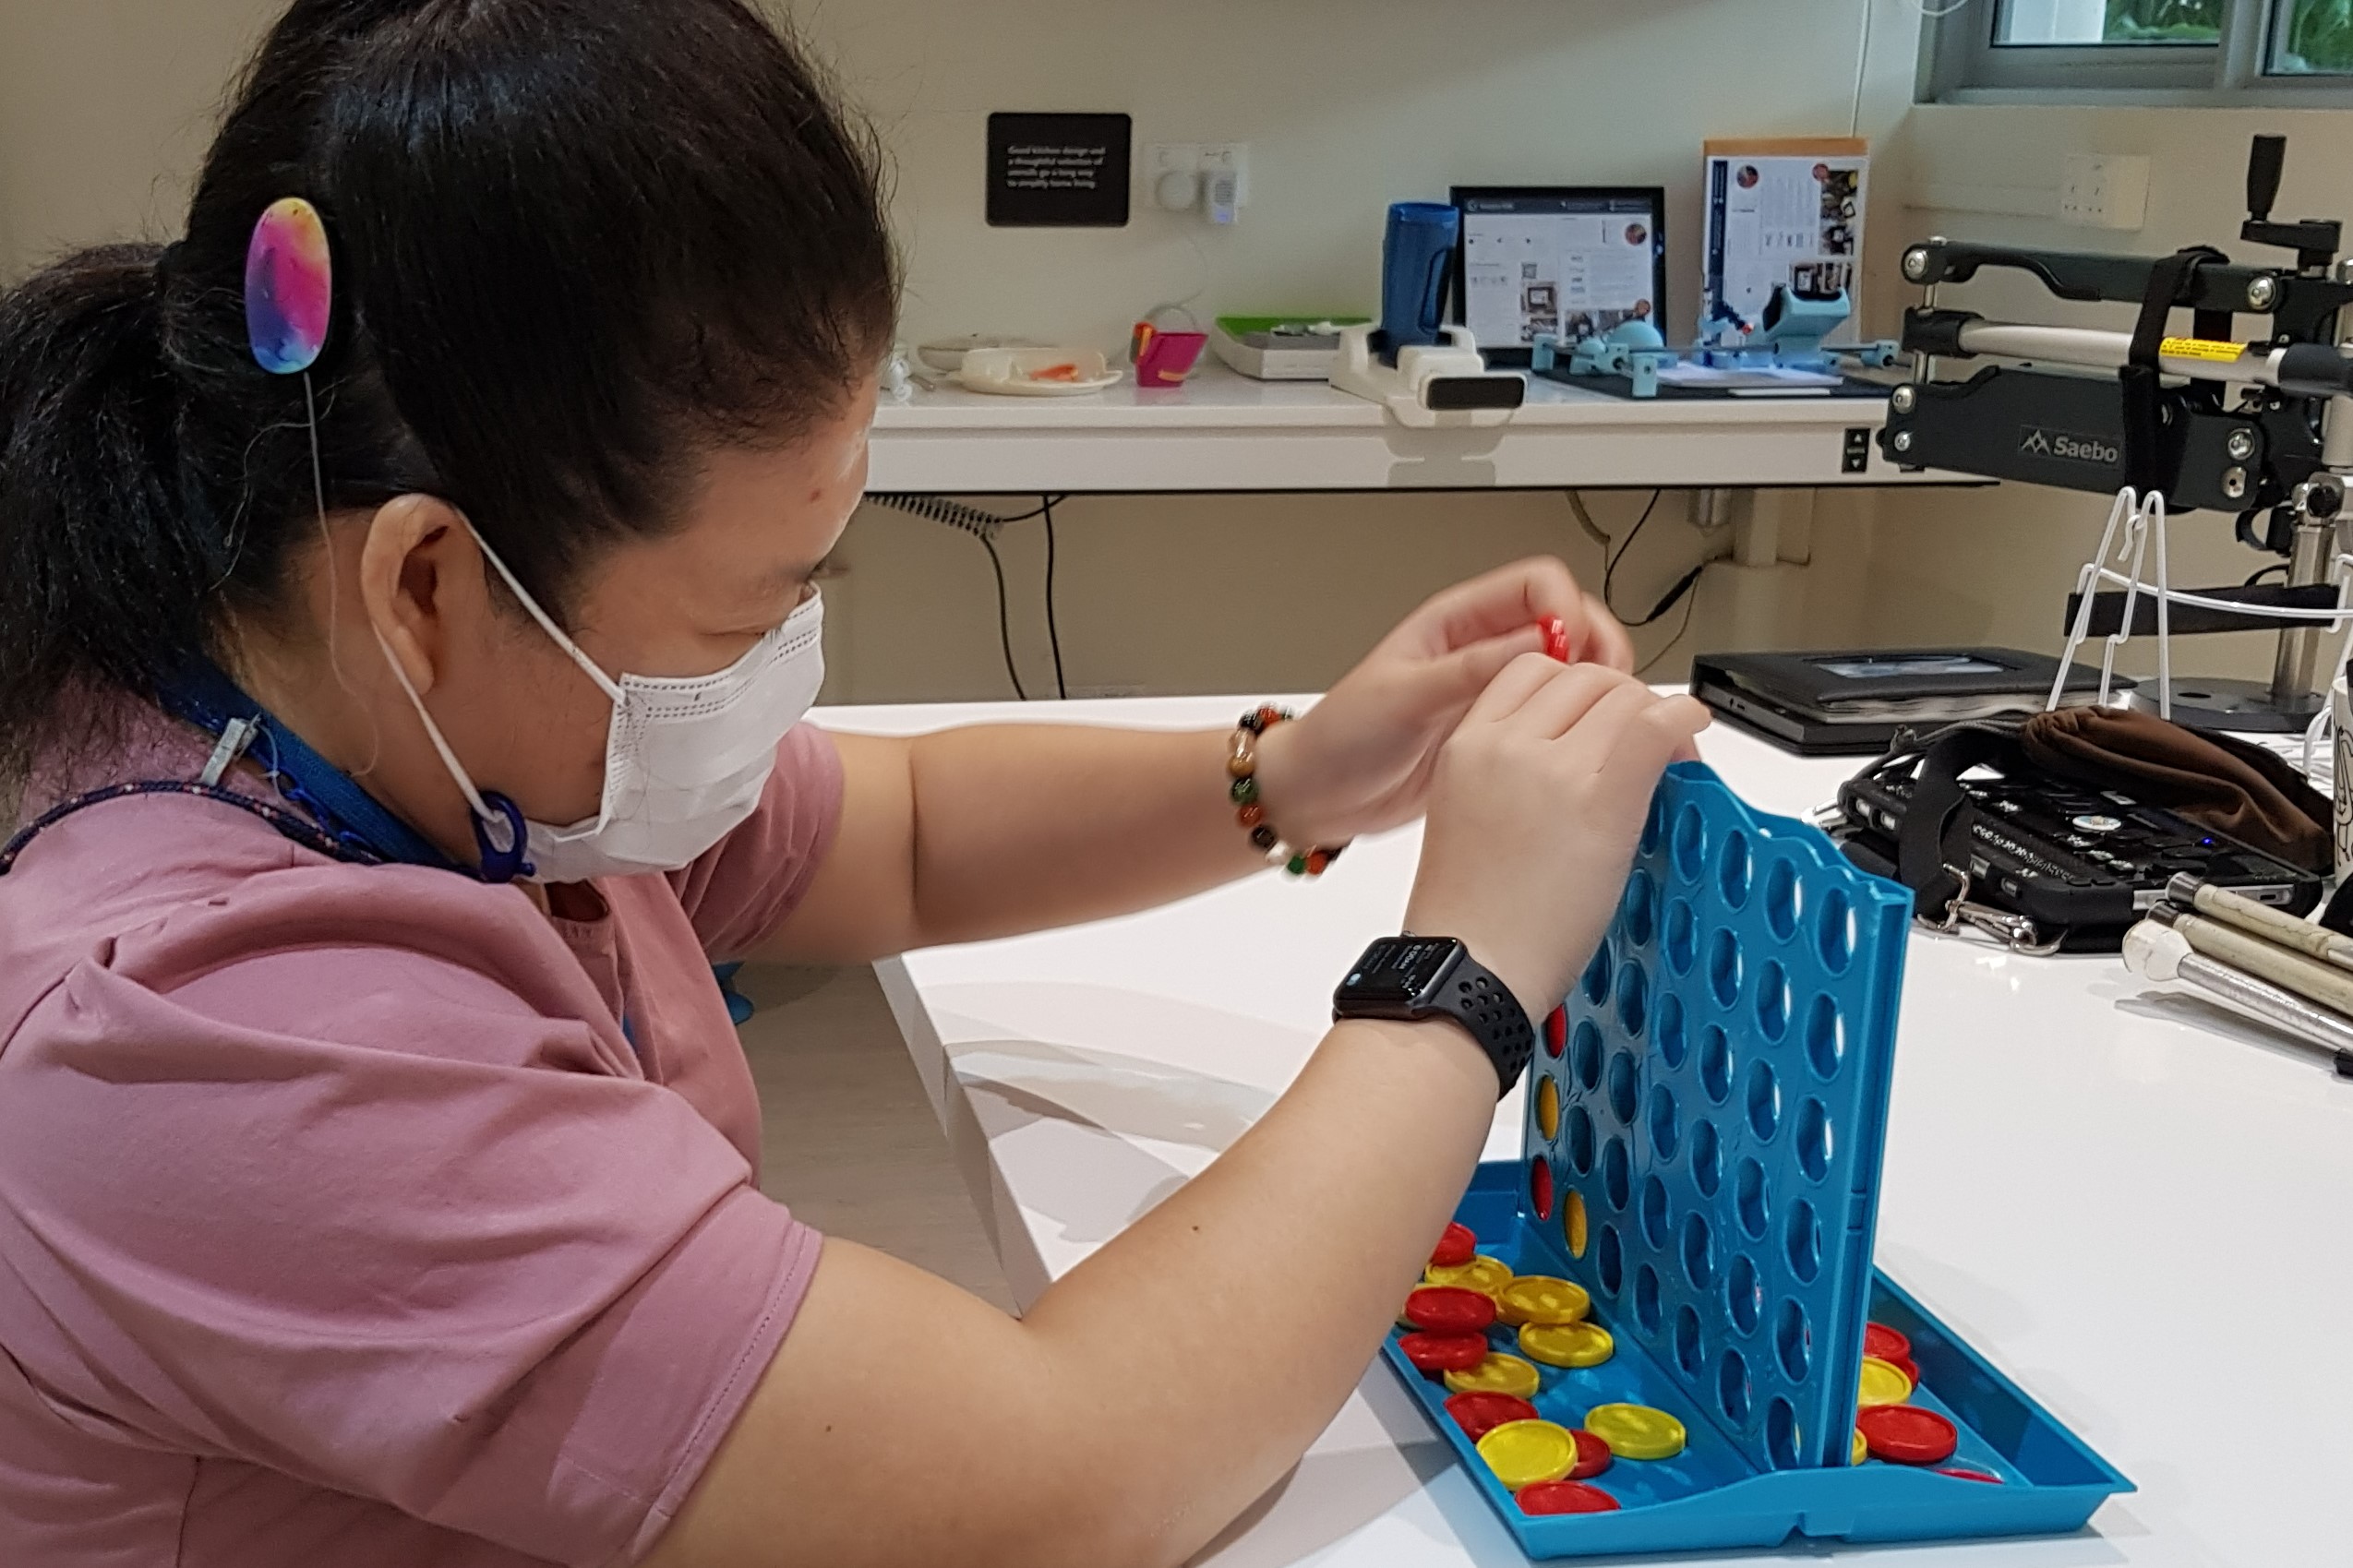 Siew Ling playing with the Connect Four game by dropping a tactile chip into a vertical slot.